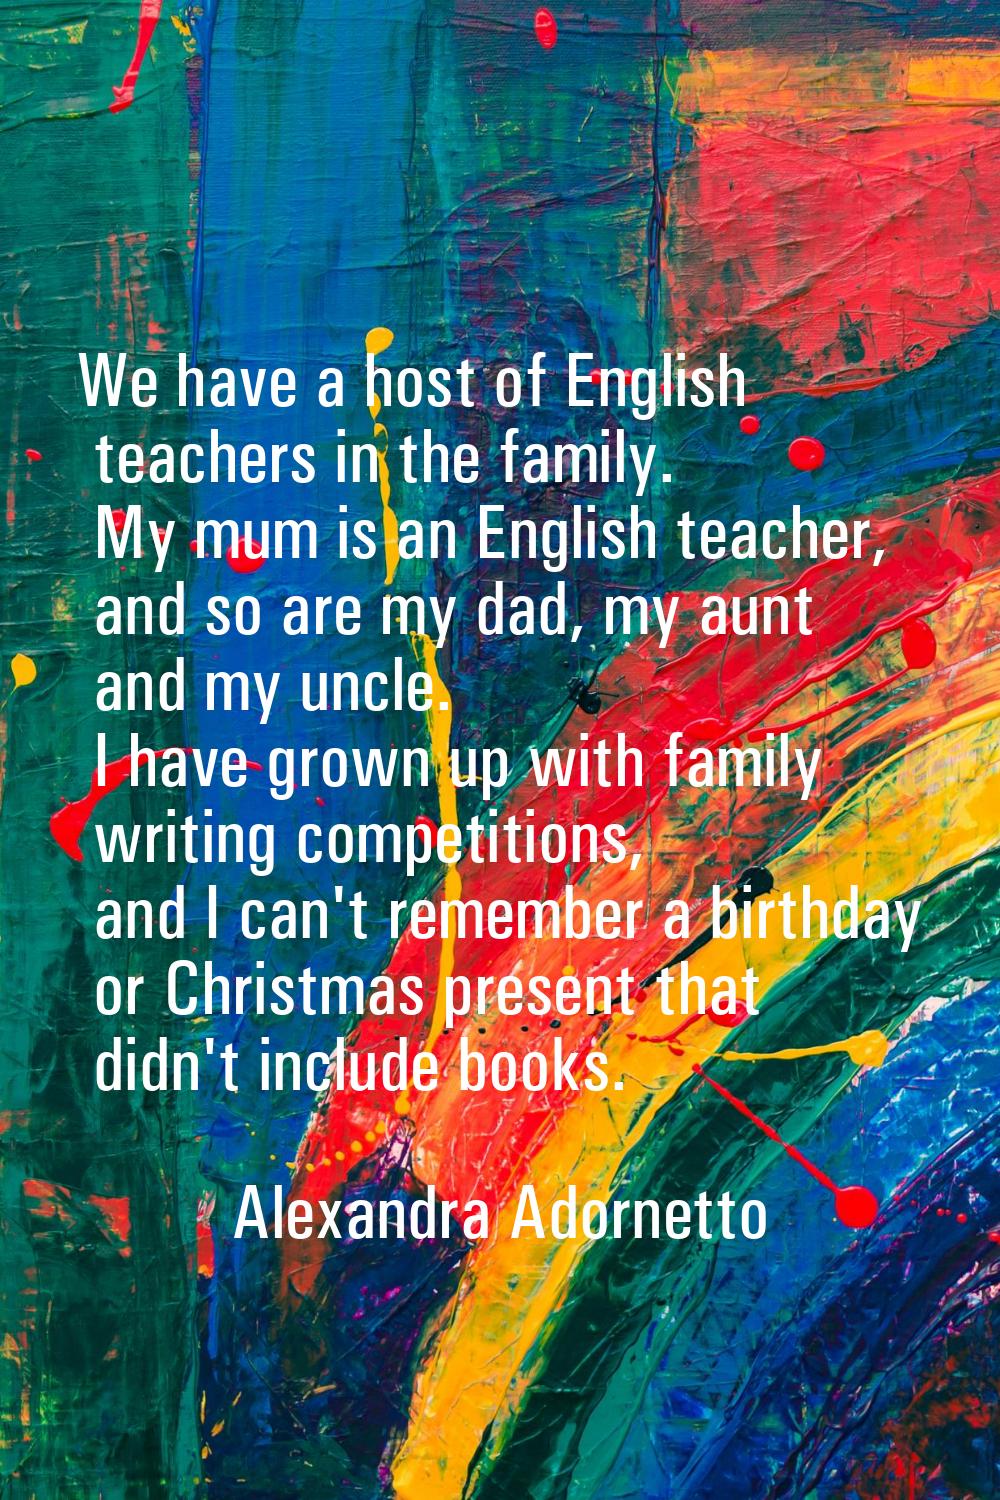 We have a host of English teachers in the family. My mum is an English teacher, and so are my dad, 